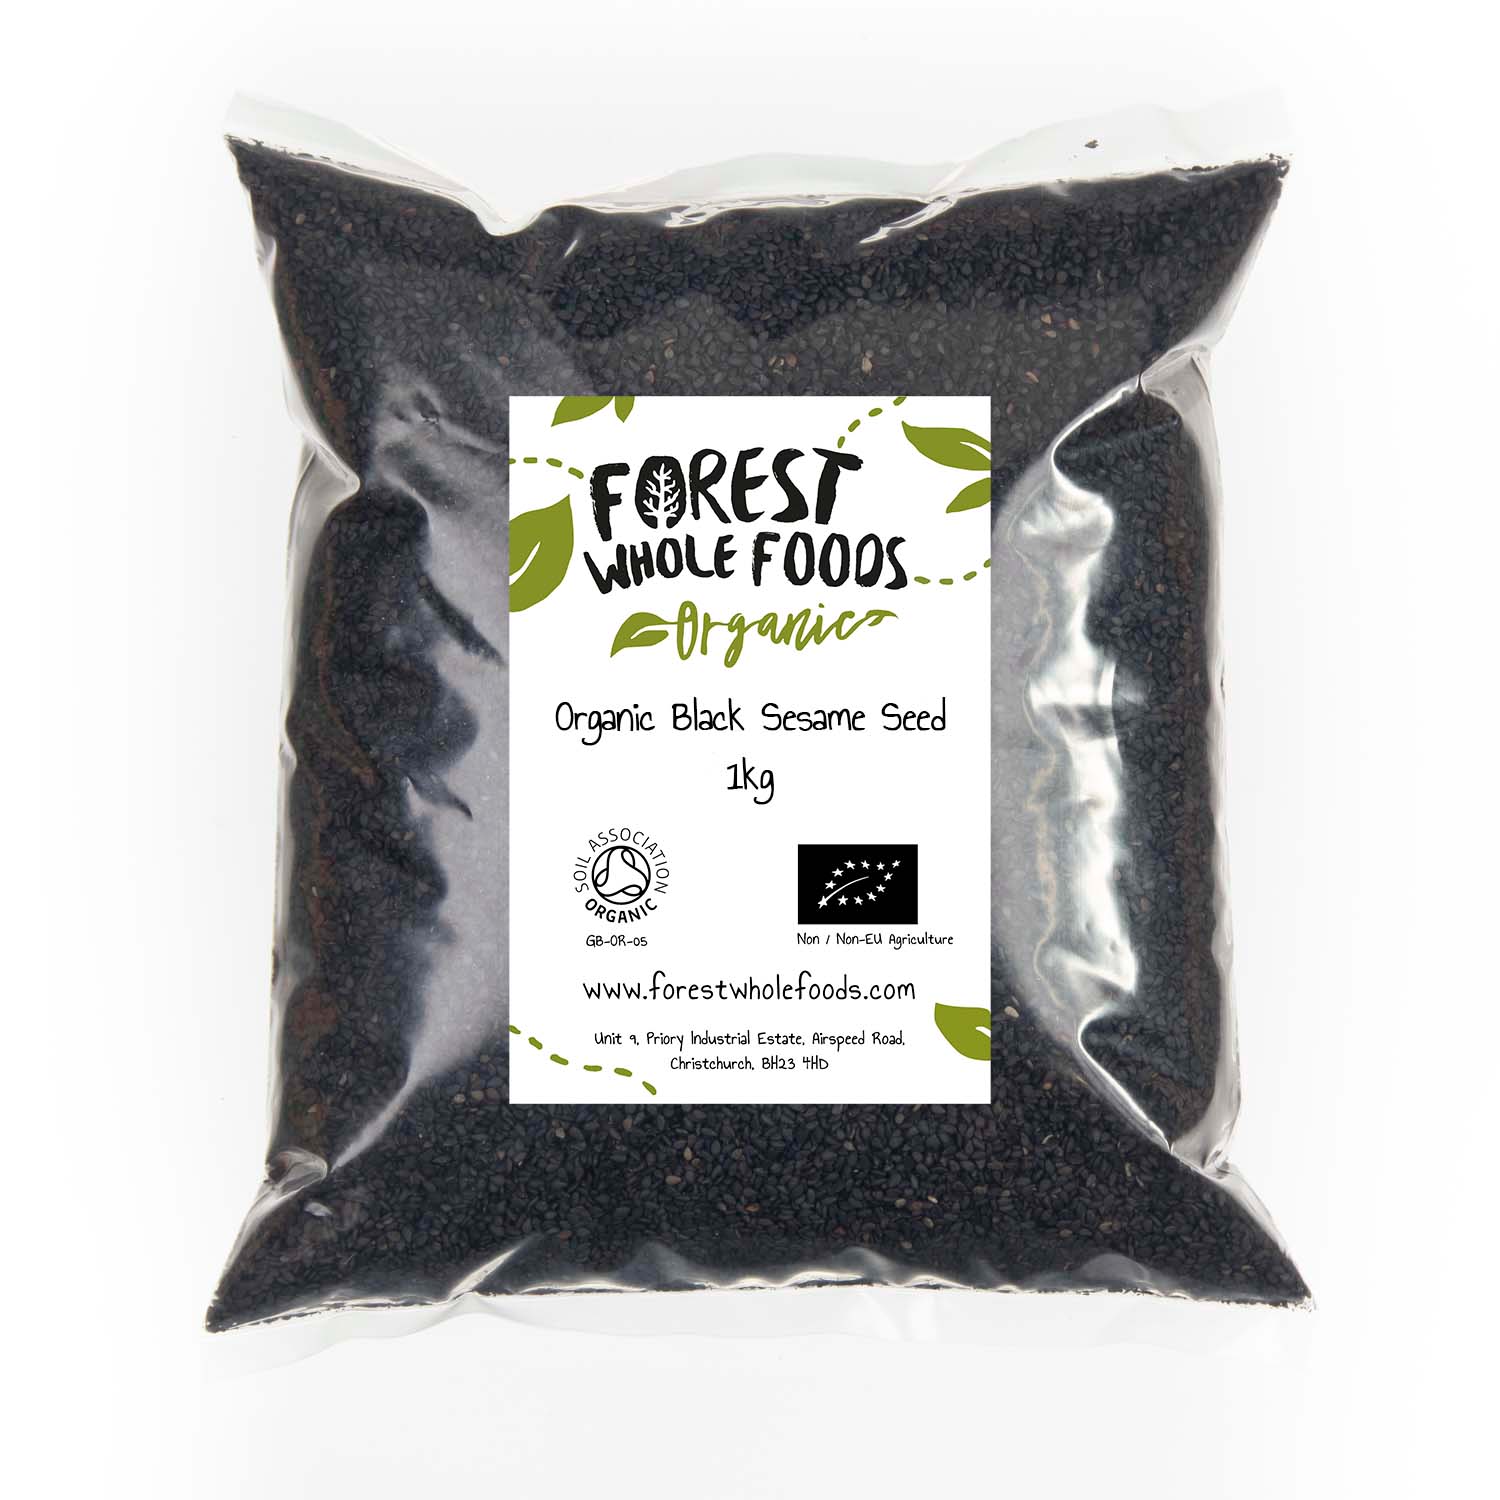 Organic Black Sesame Seed - Forest Whole Foods